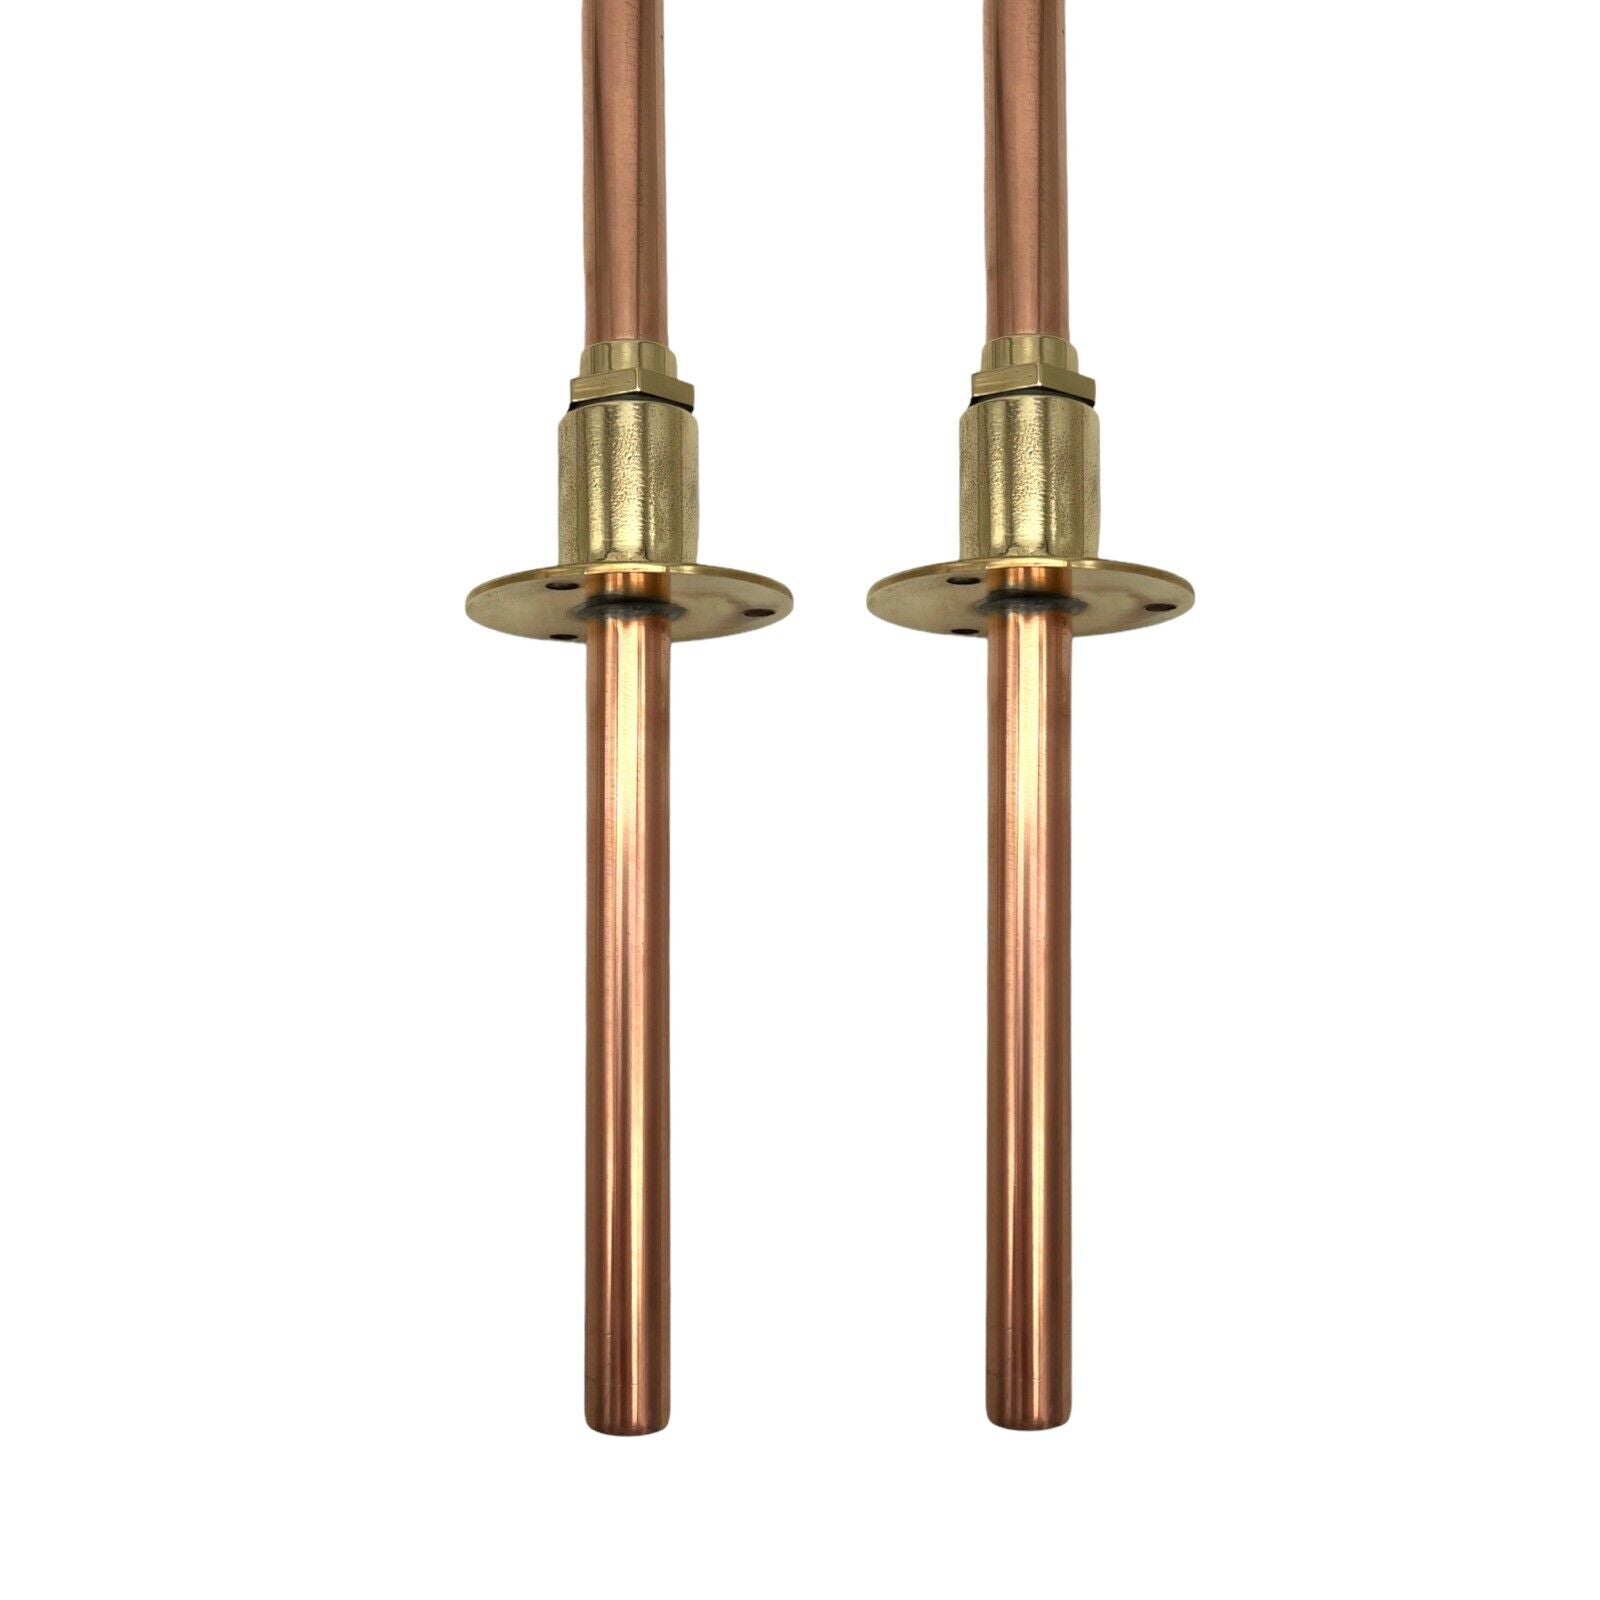 image 8 Copper and brass handmade taps sold by All Things French Store